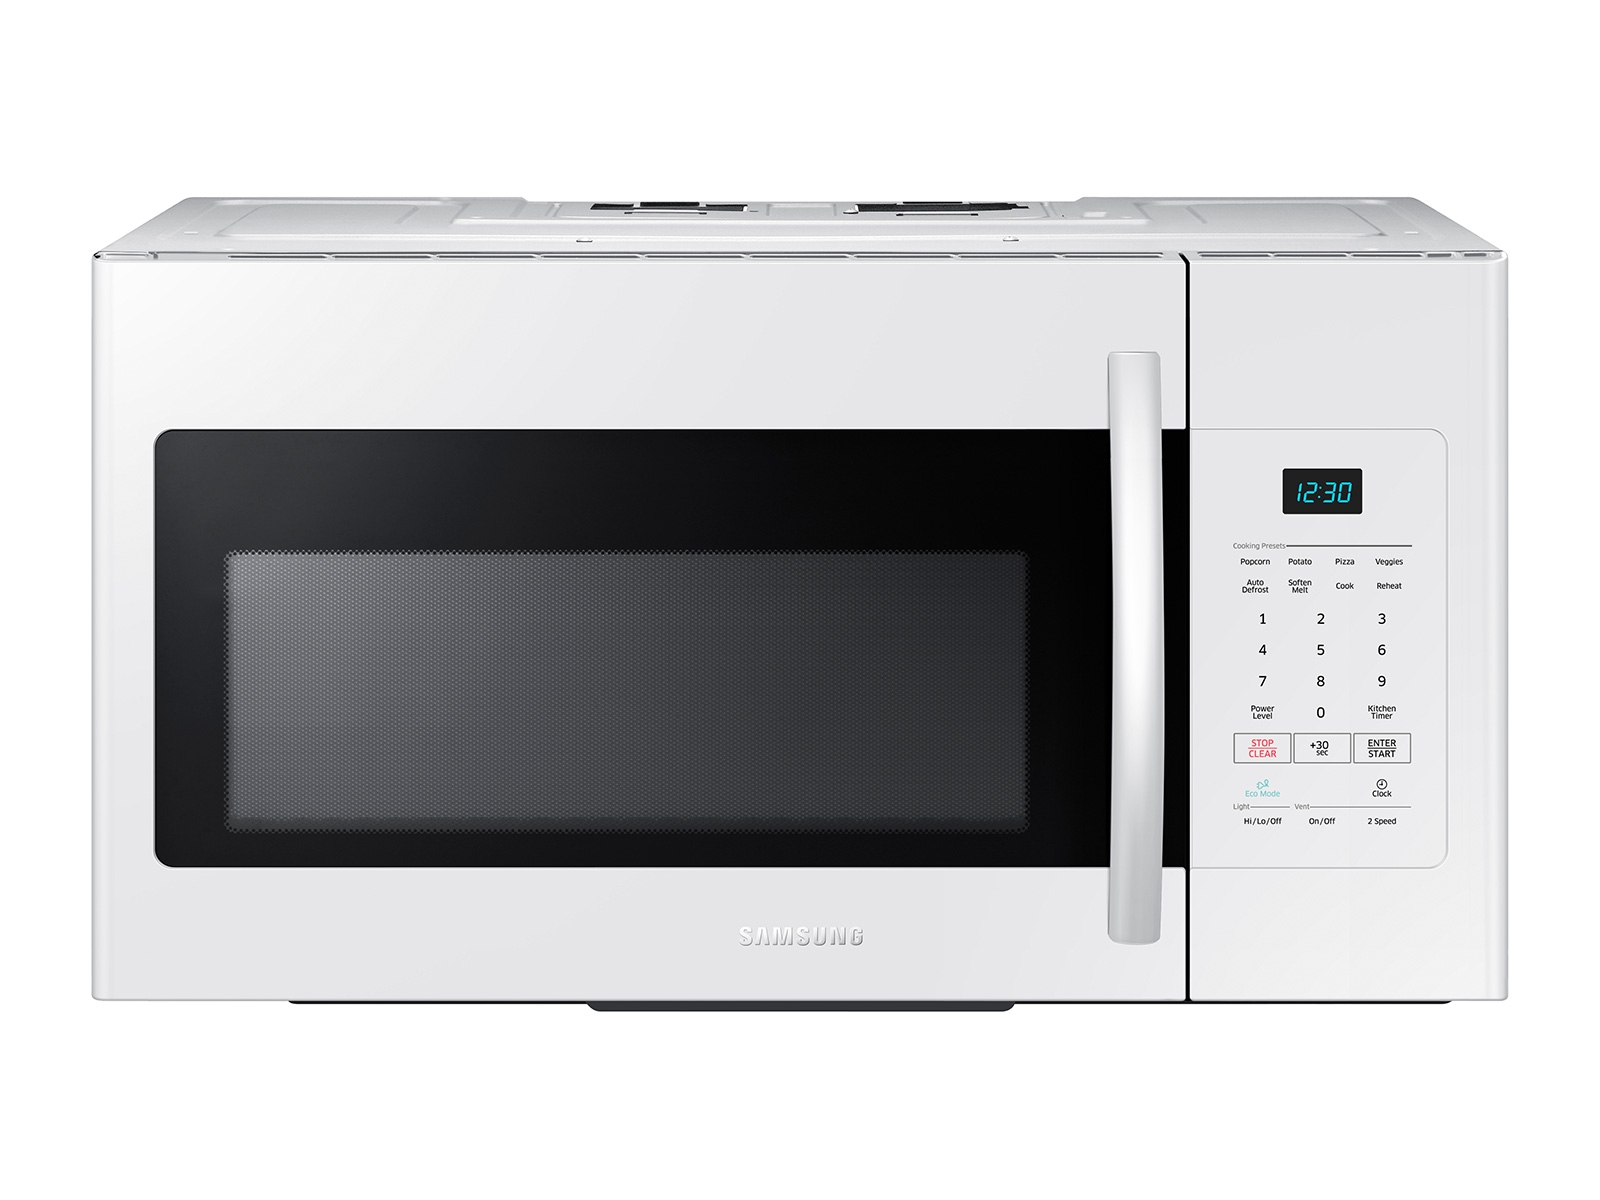 Samsung 1.6-cubic-foot Over-the-Range Microwave Oven Stainless